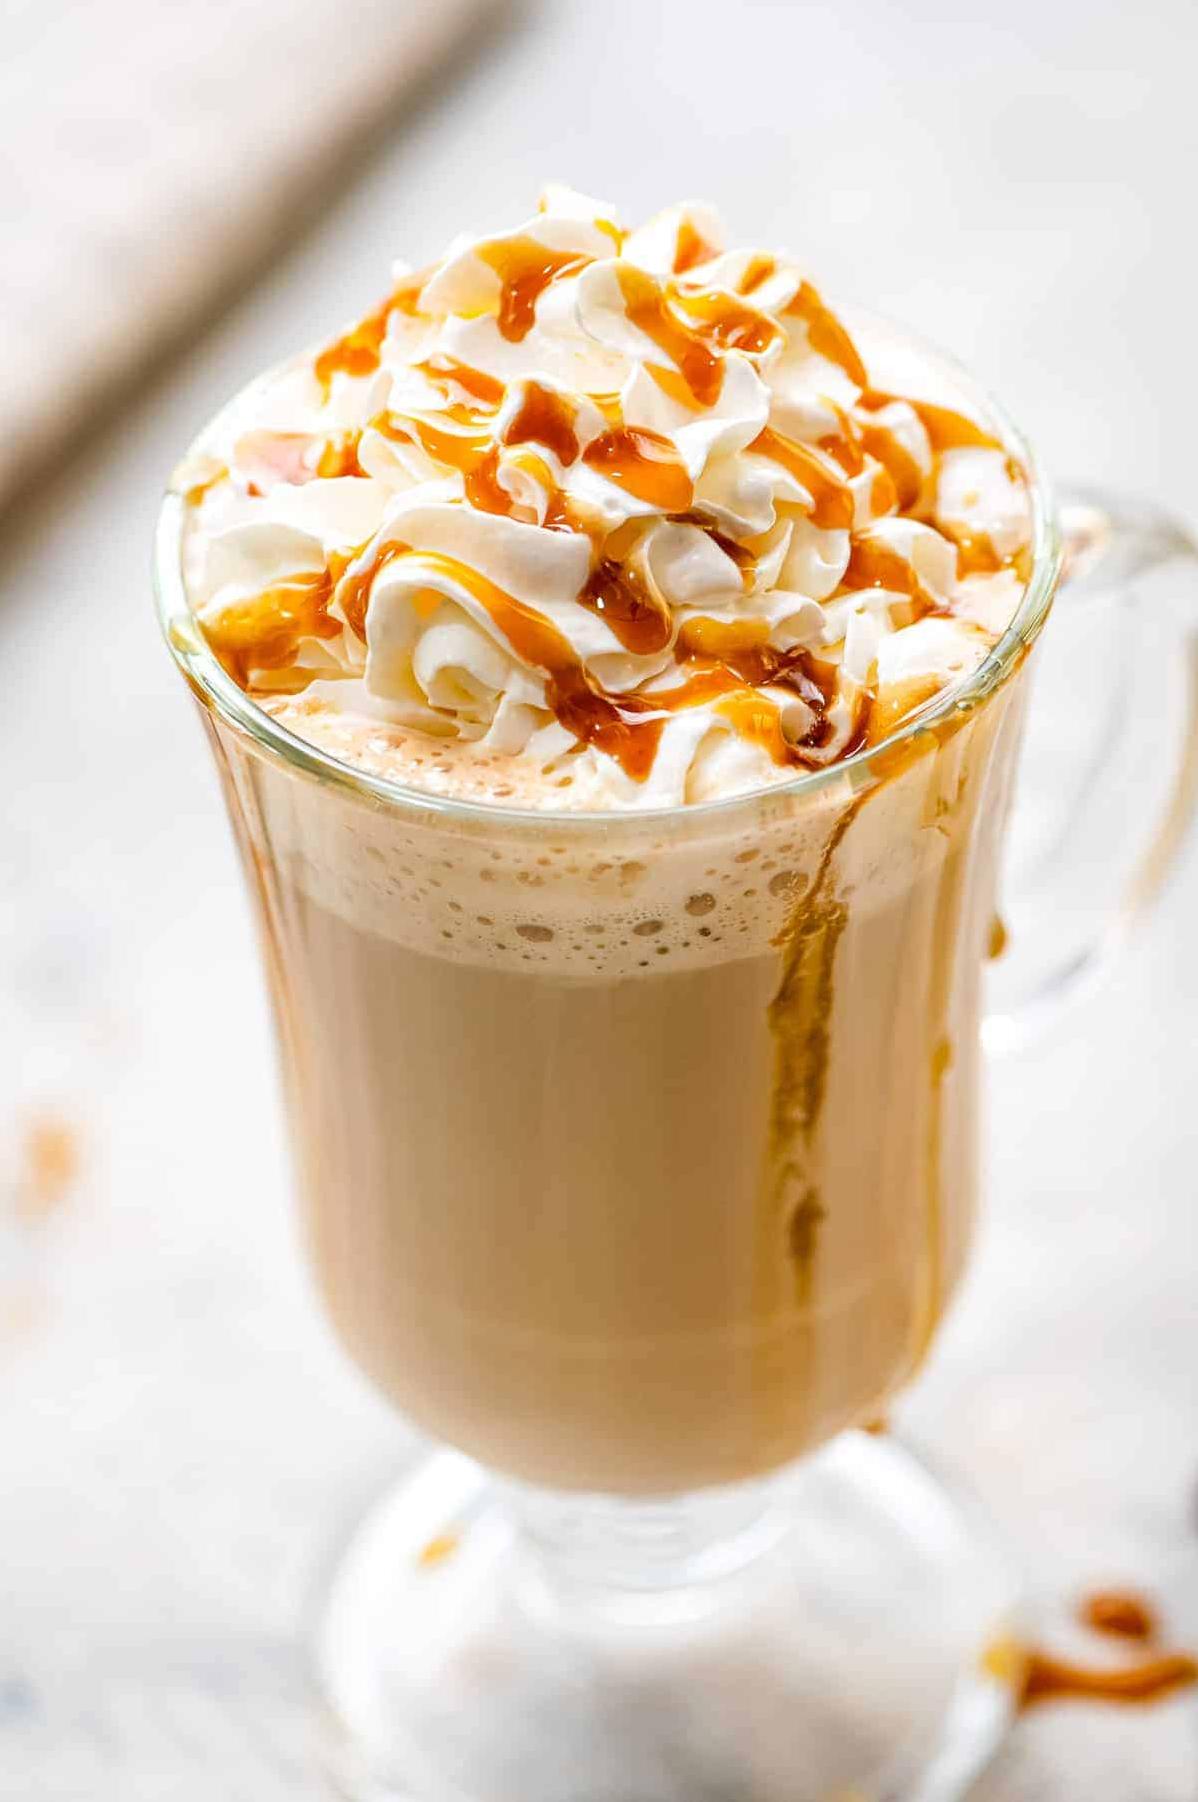  Get ready to indulge in a sweet coffee fix that doubles up as a dessert.